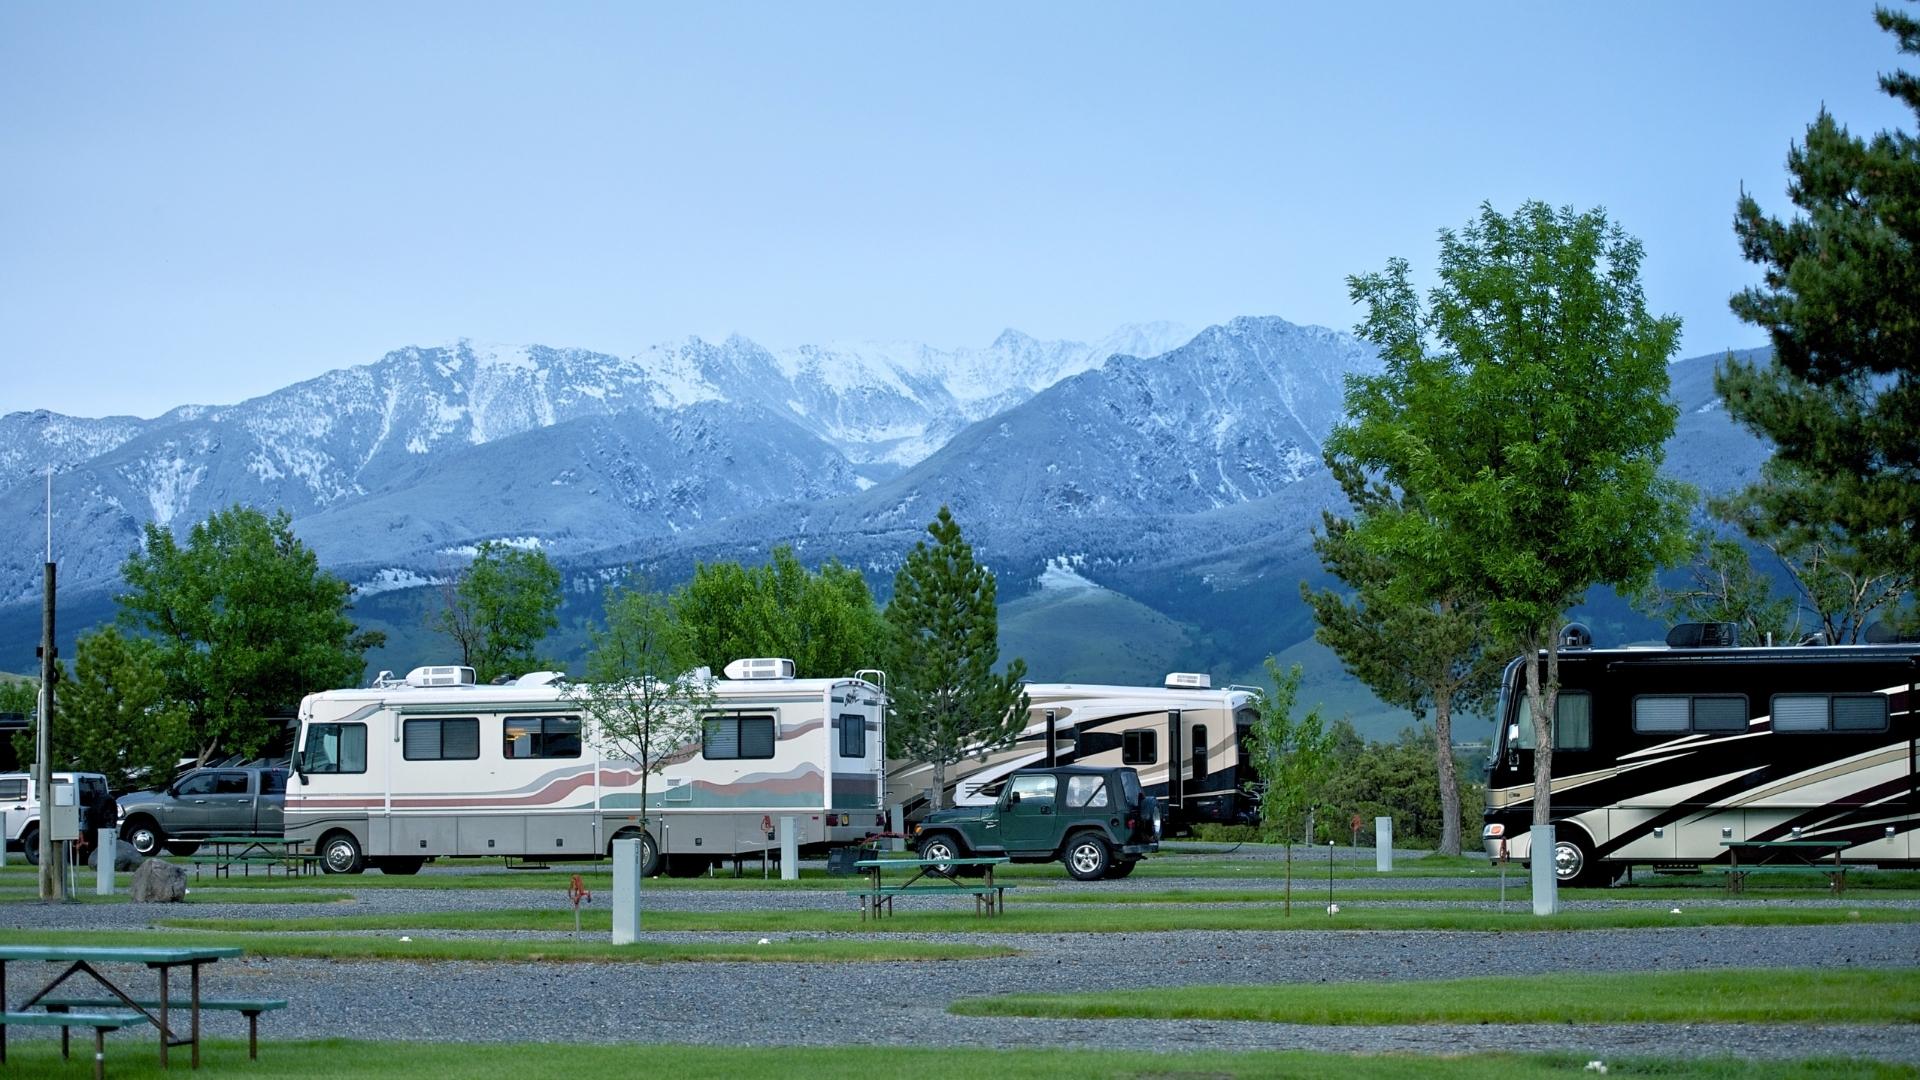 How to Find Big Rig RV Parks